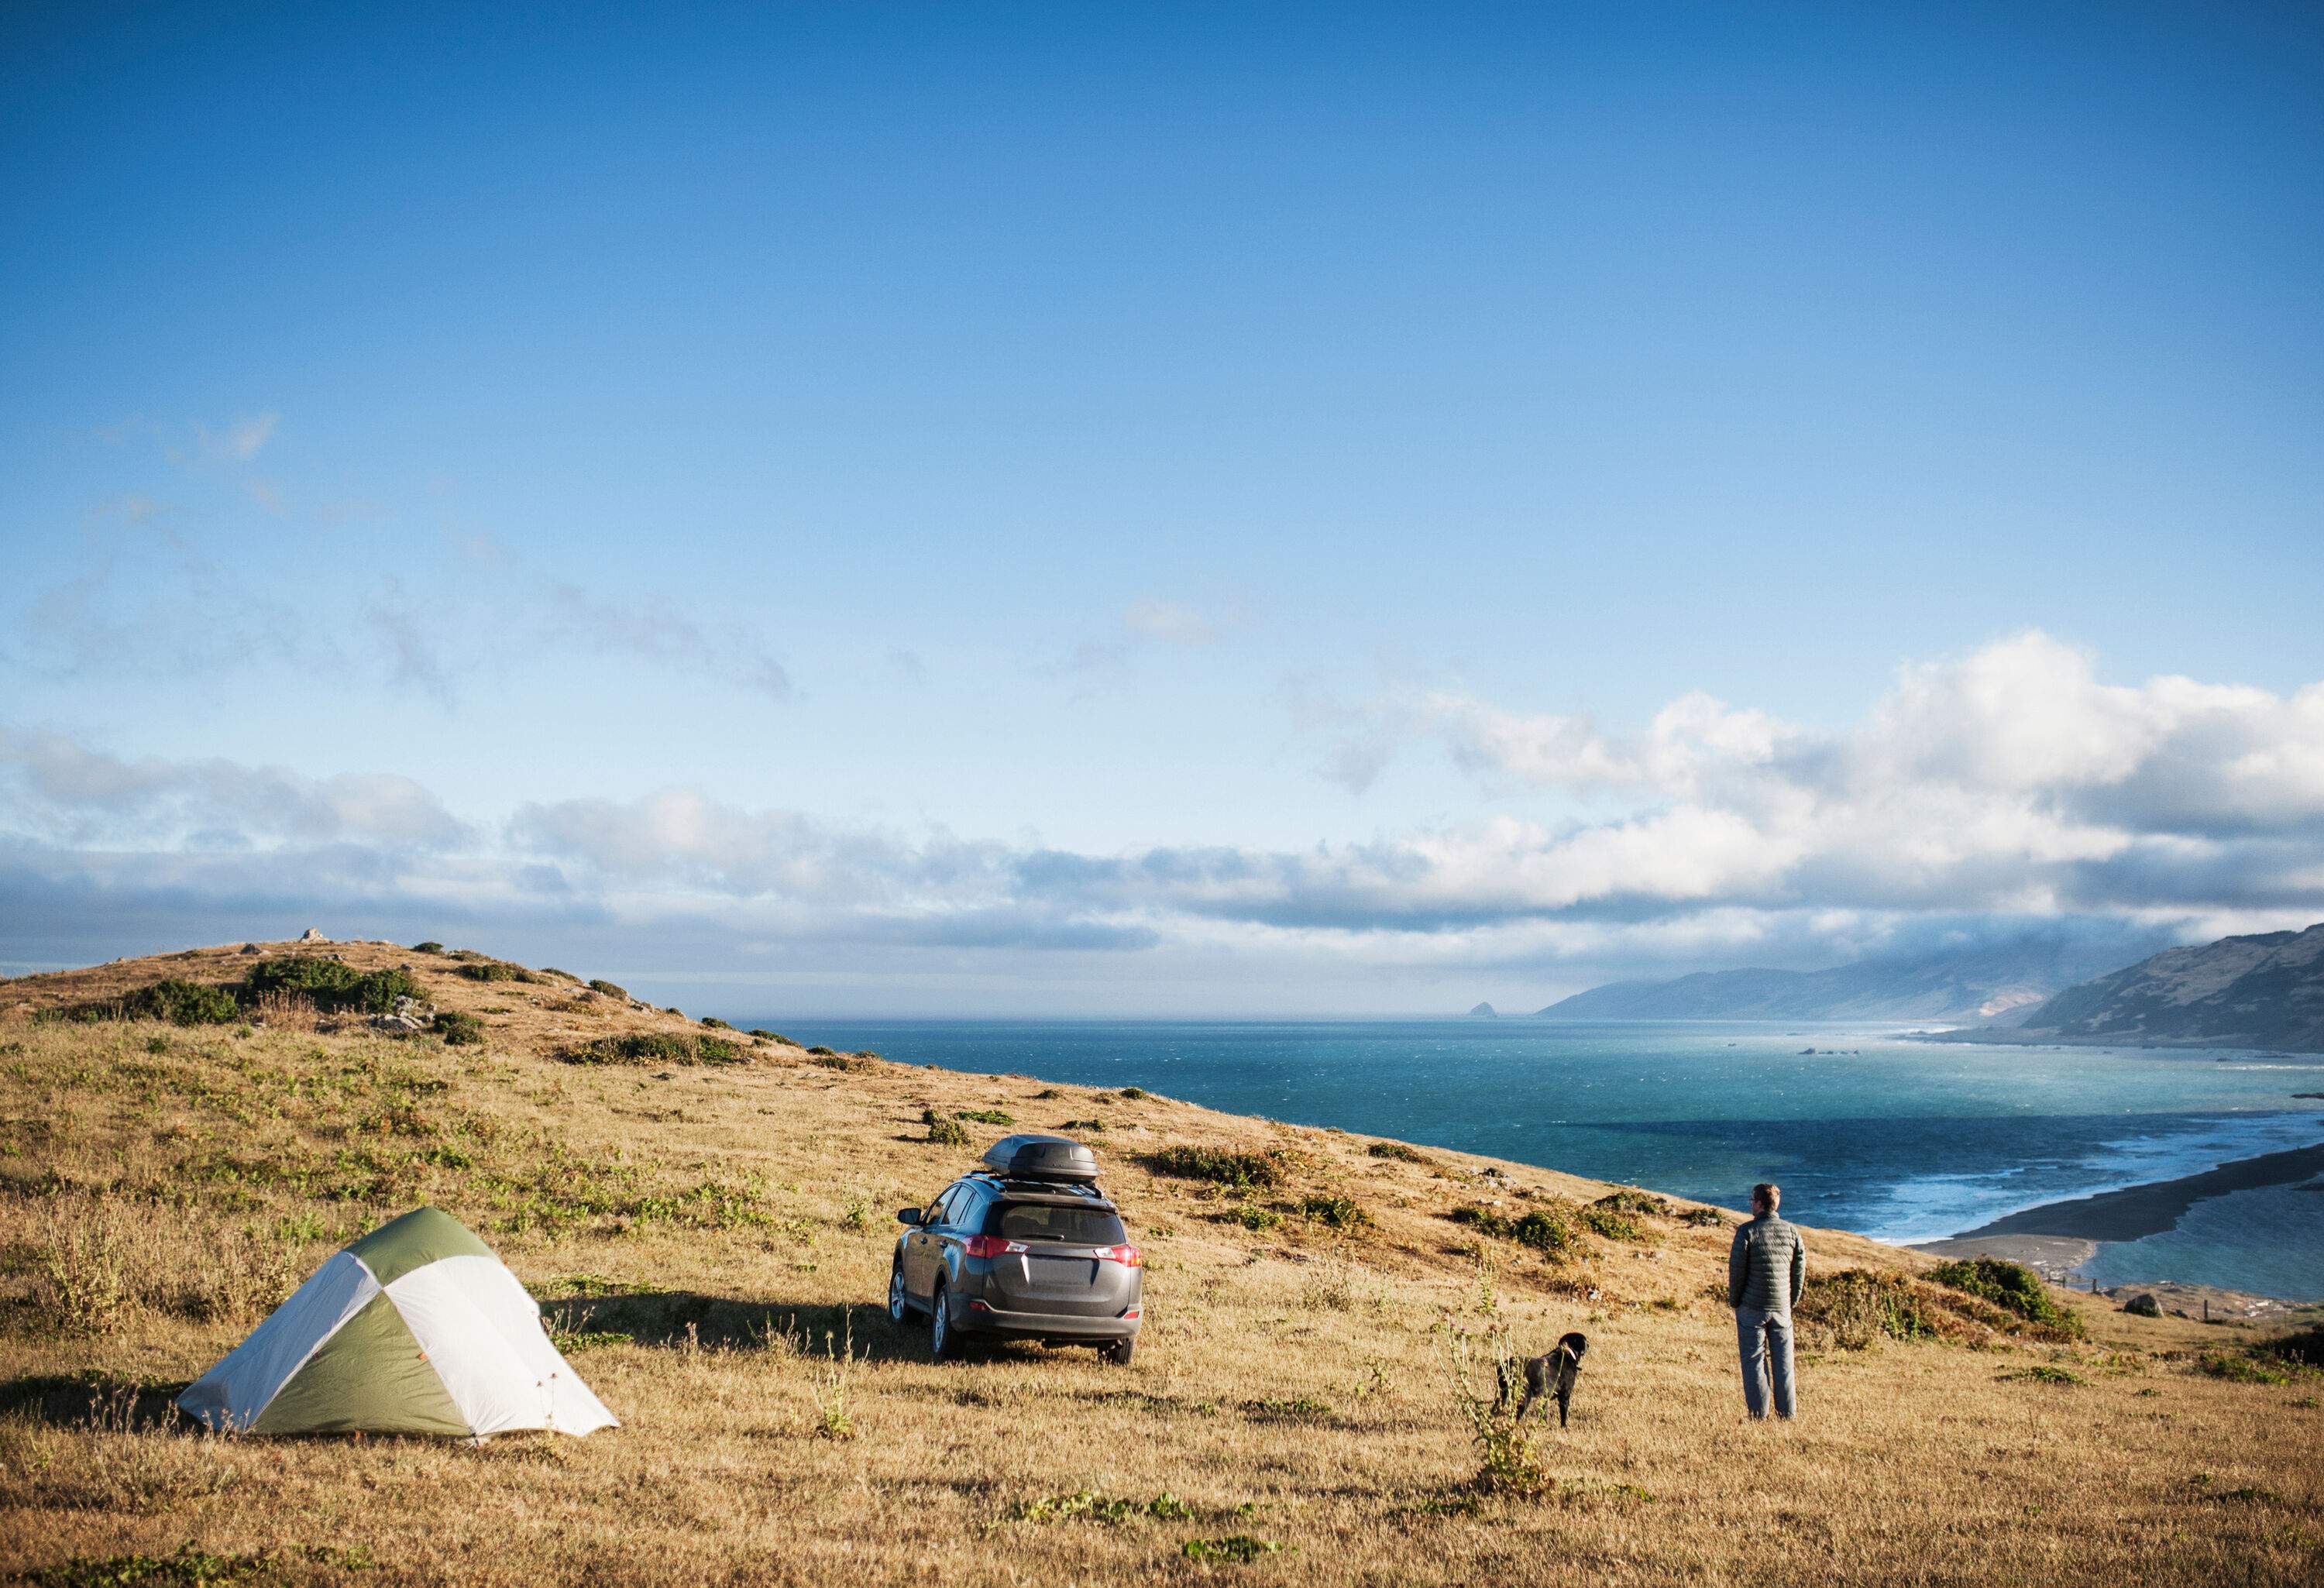 A person stands beside a dog next to a car and a tent pitched on the hilltop.